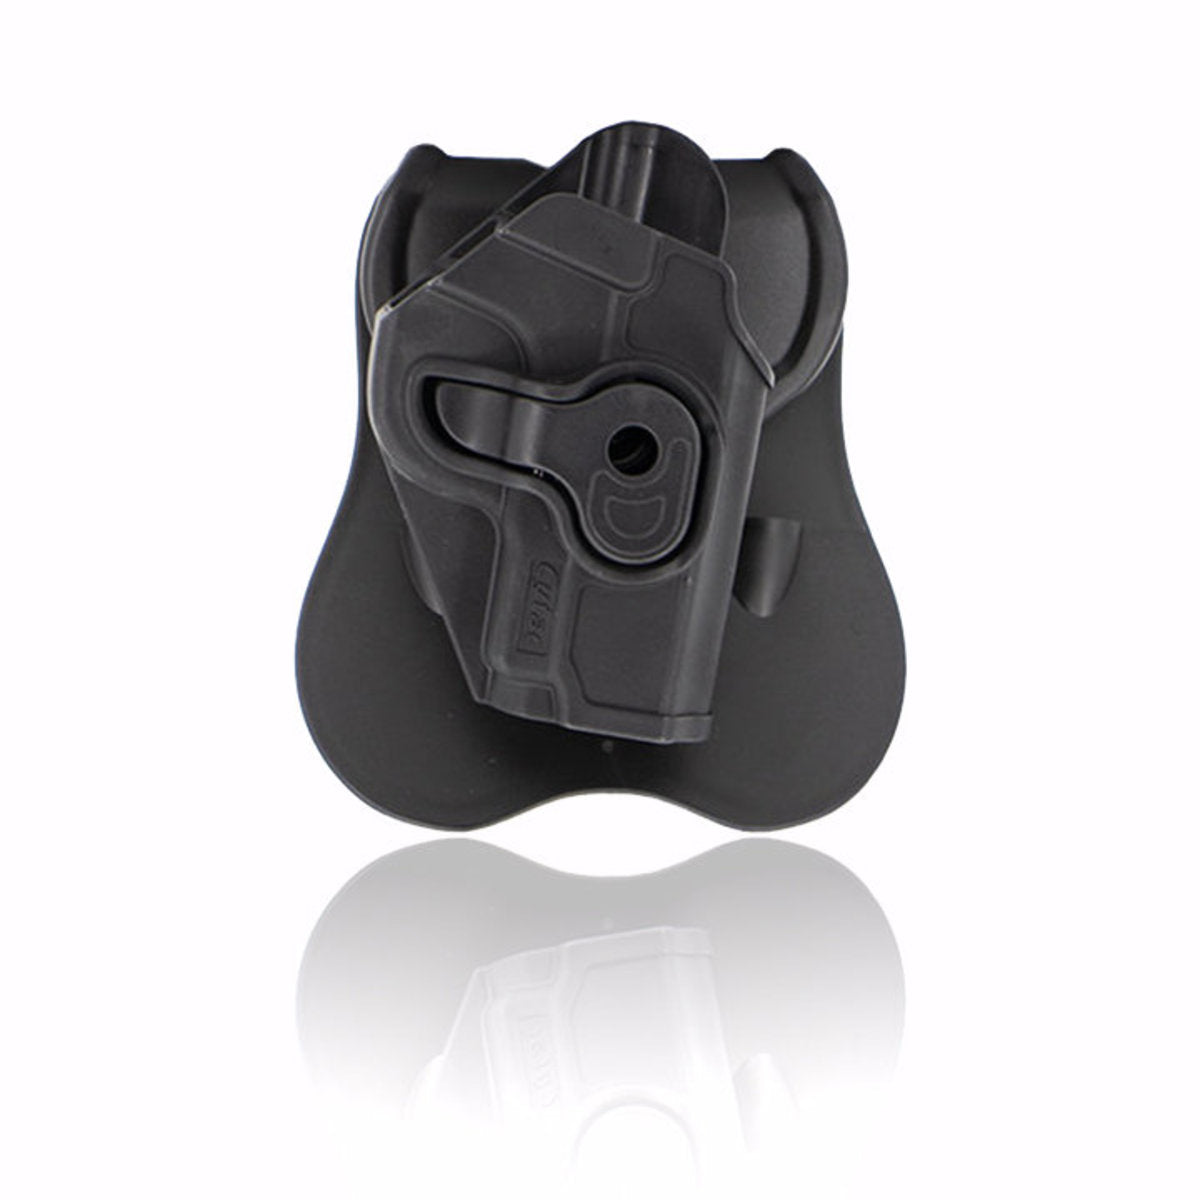 Cytac OWB Holster - Fits Sig Sauer P220, P225, P226, P228, P229, Norinco NP22 - Eminent Paintball And Airsoft